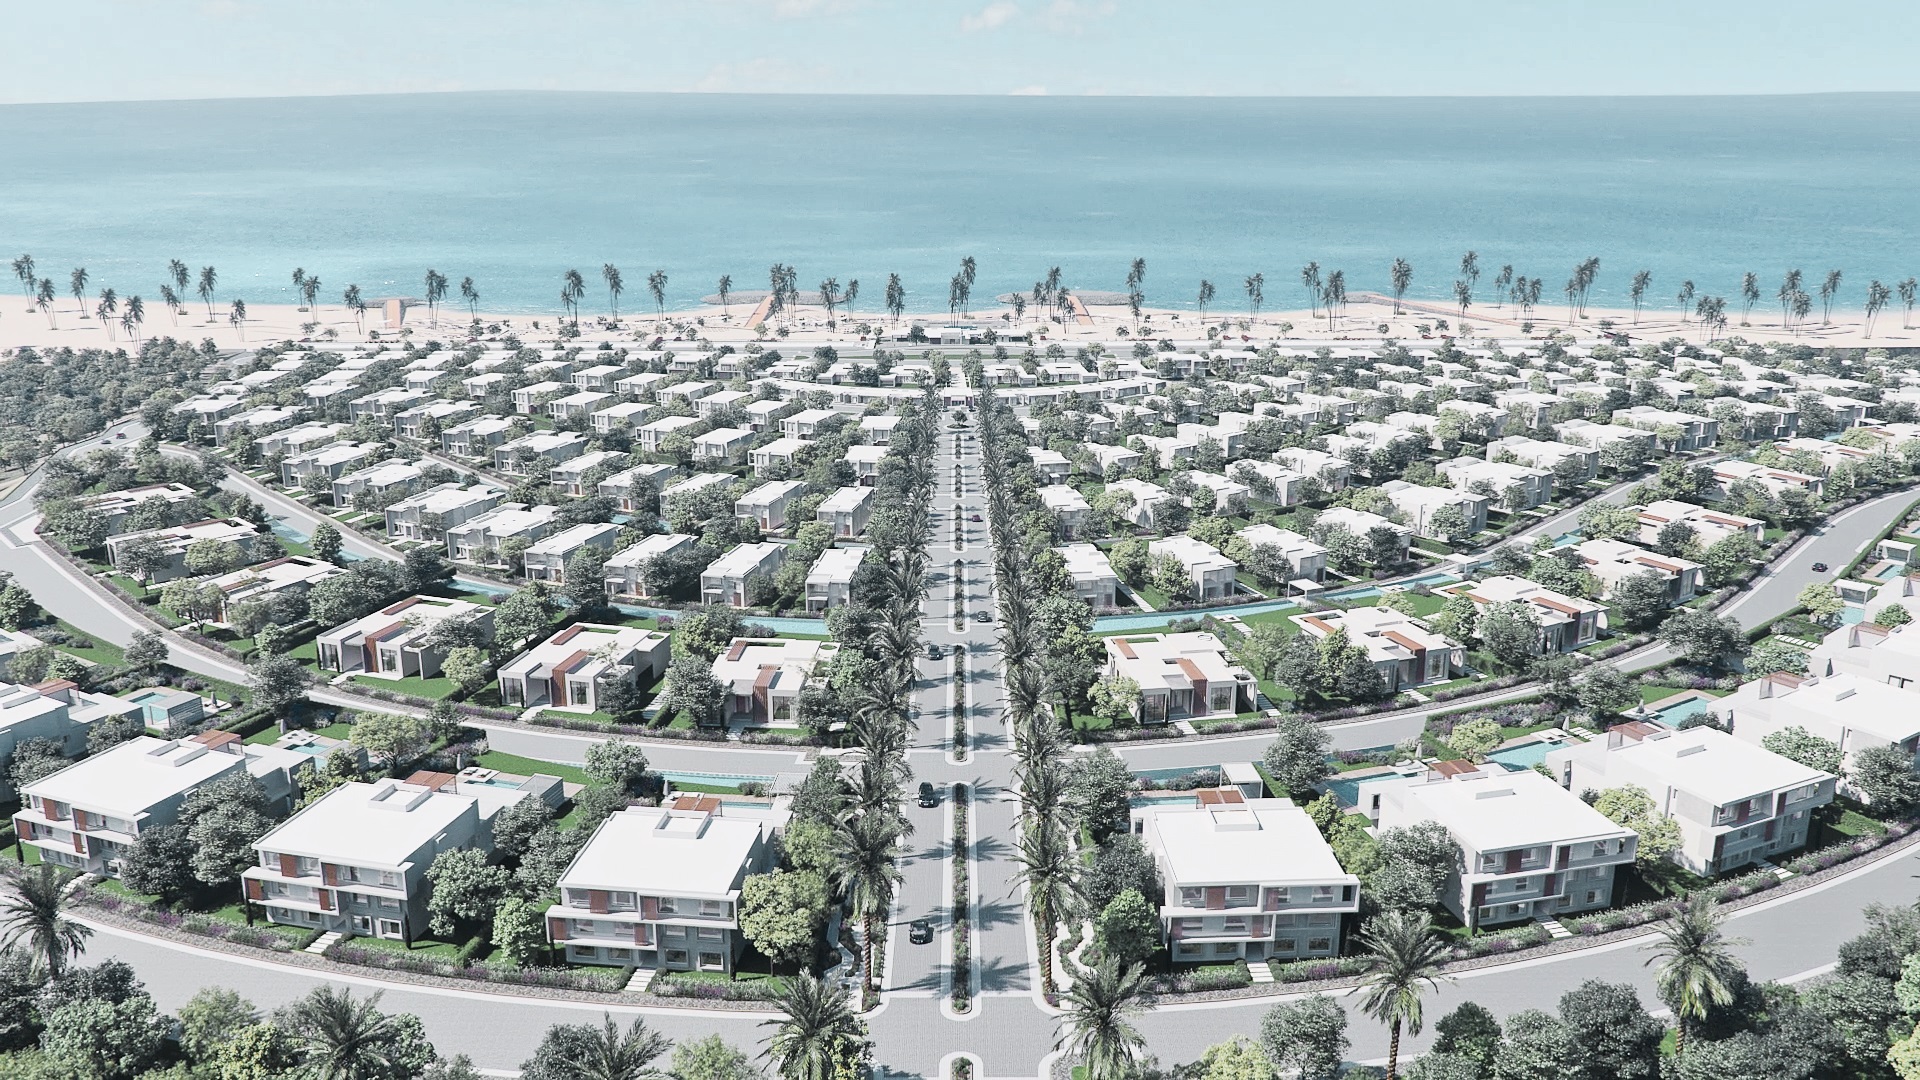 Starlight Developments assigns construction work of the first phase of Katameya Coast to Gama Construction